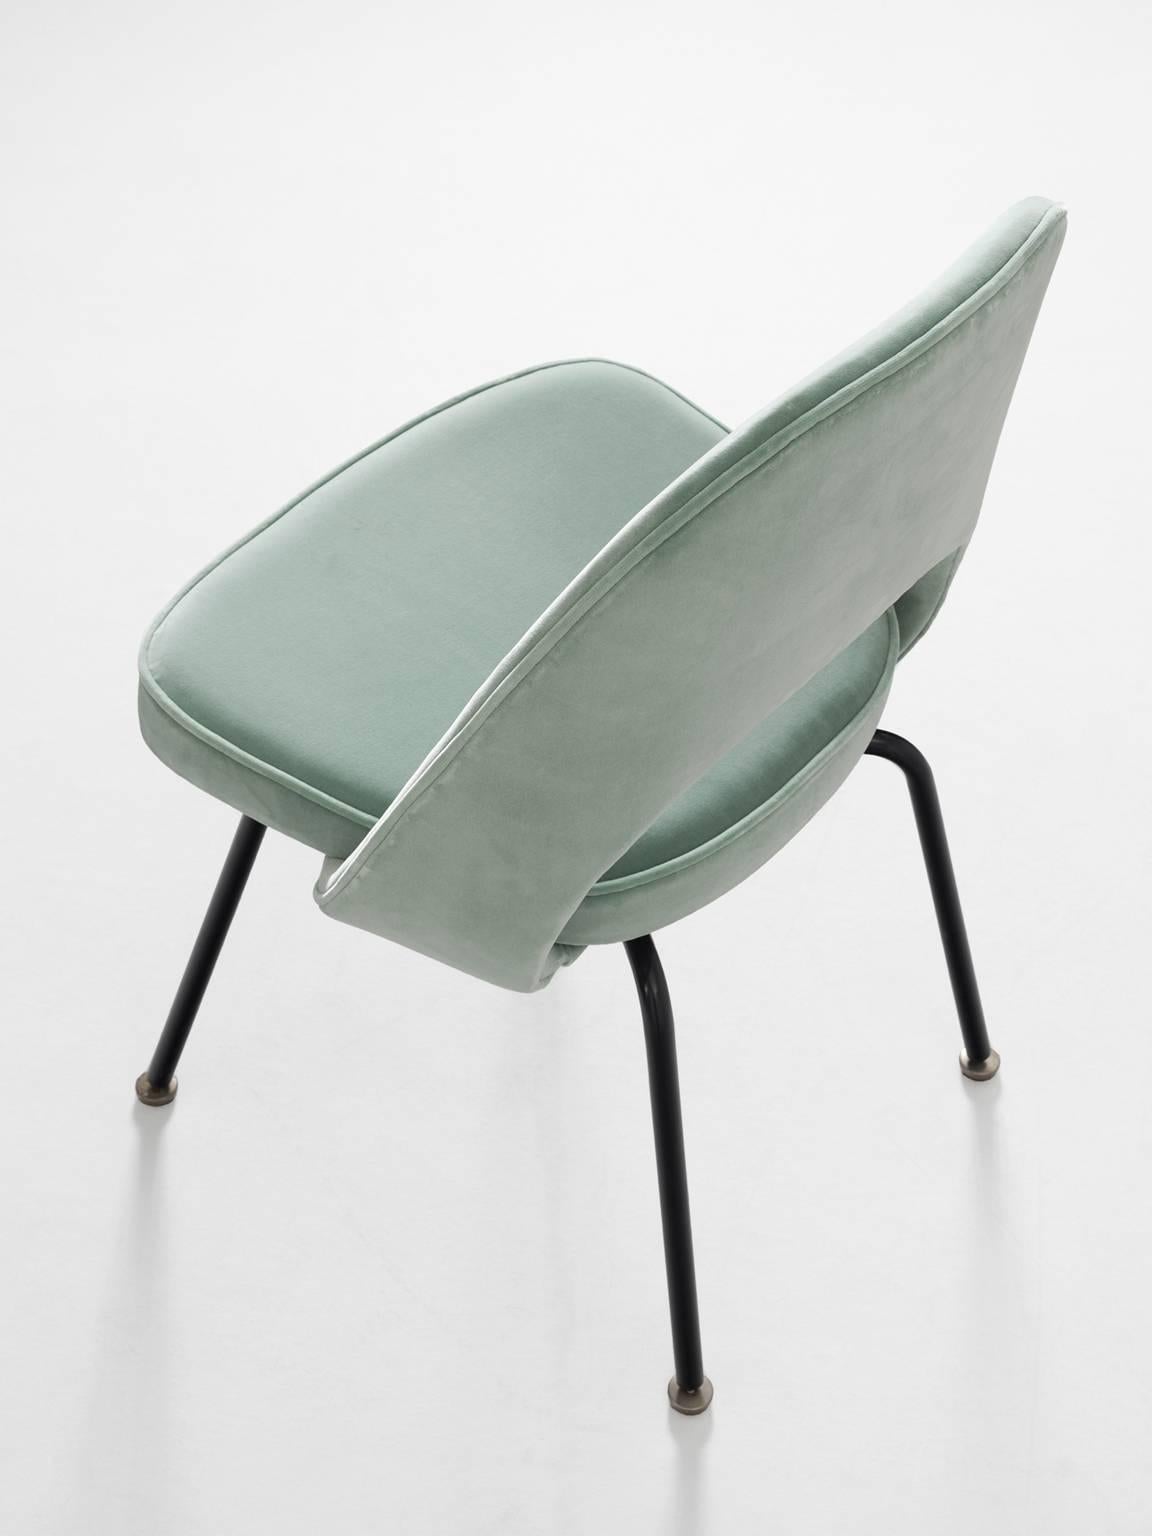 Set of eight chairs model 72, in metal and fabric, by Eero Saarinen for Knoll International, United States 1948. 

Eight organic shaped chairs designed by Eero Saarinen. This iconic model is reupholstered in a soft sea-green velvet fabric. A